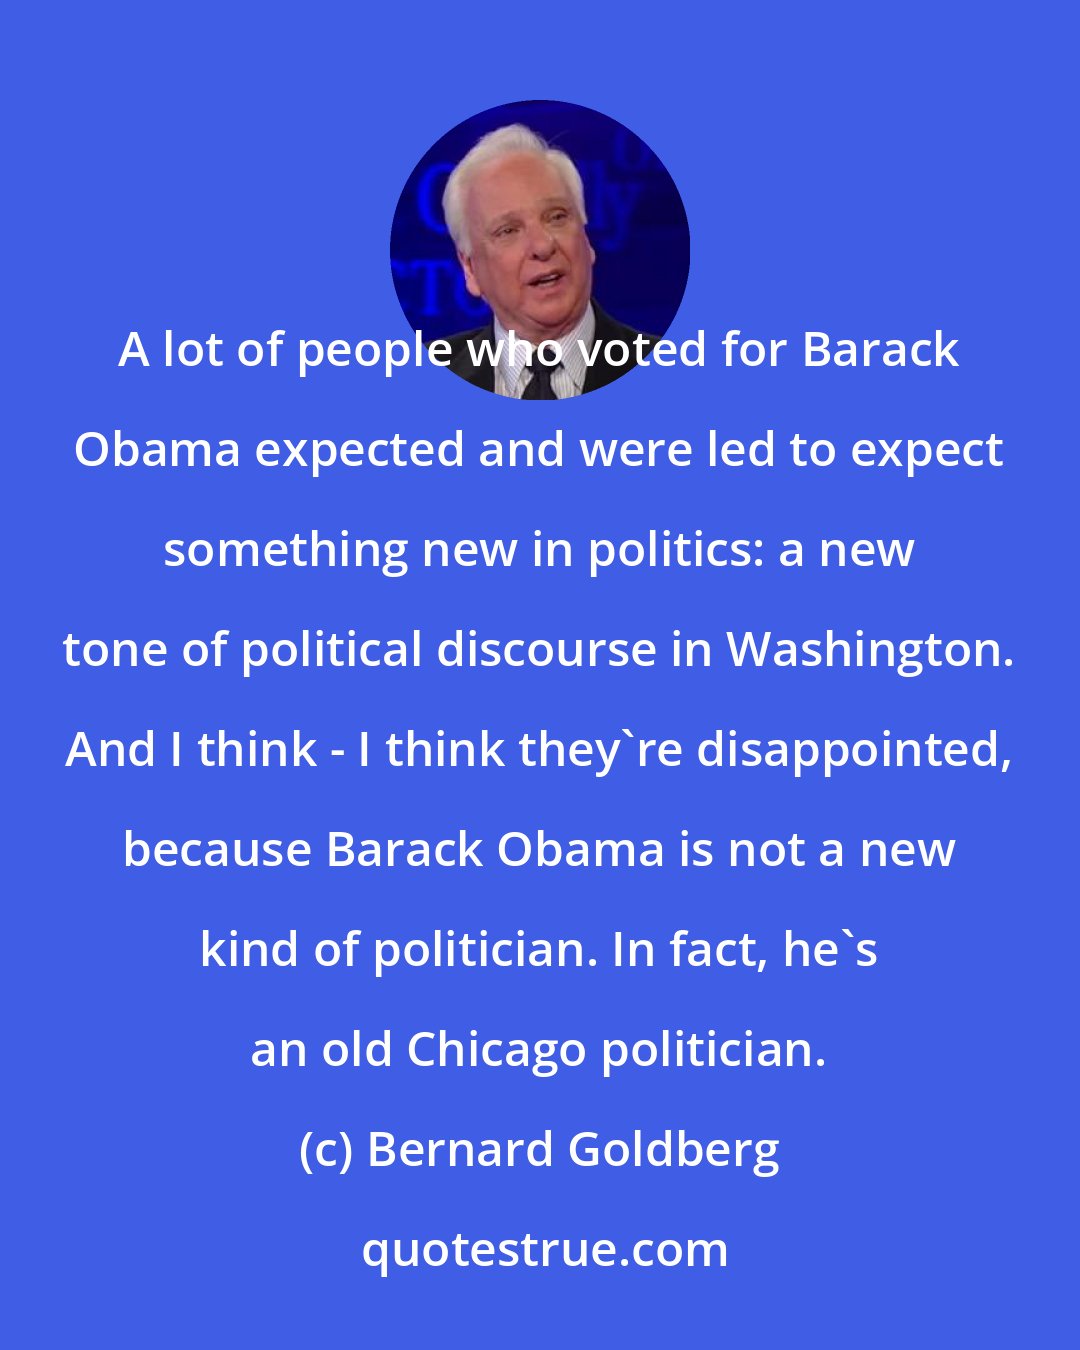 Bernard Goldberg: A lot of people who voted for Barack Obama expected and were led to expect something new in politics: a new tone of political discourse in Washington. And I think - I think they're disappointed, because Barack Obama is not a new kind of politician. In fact, he's an old Chicago politician.